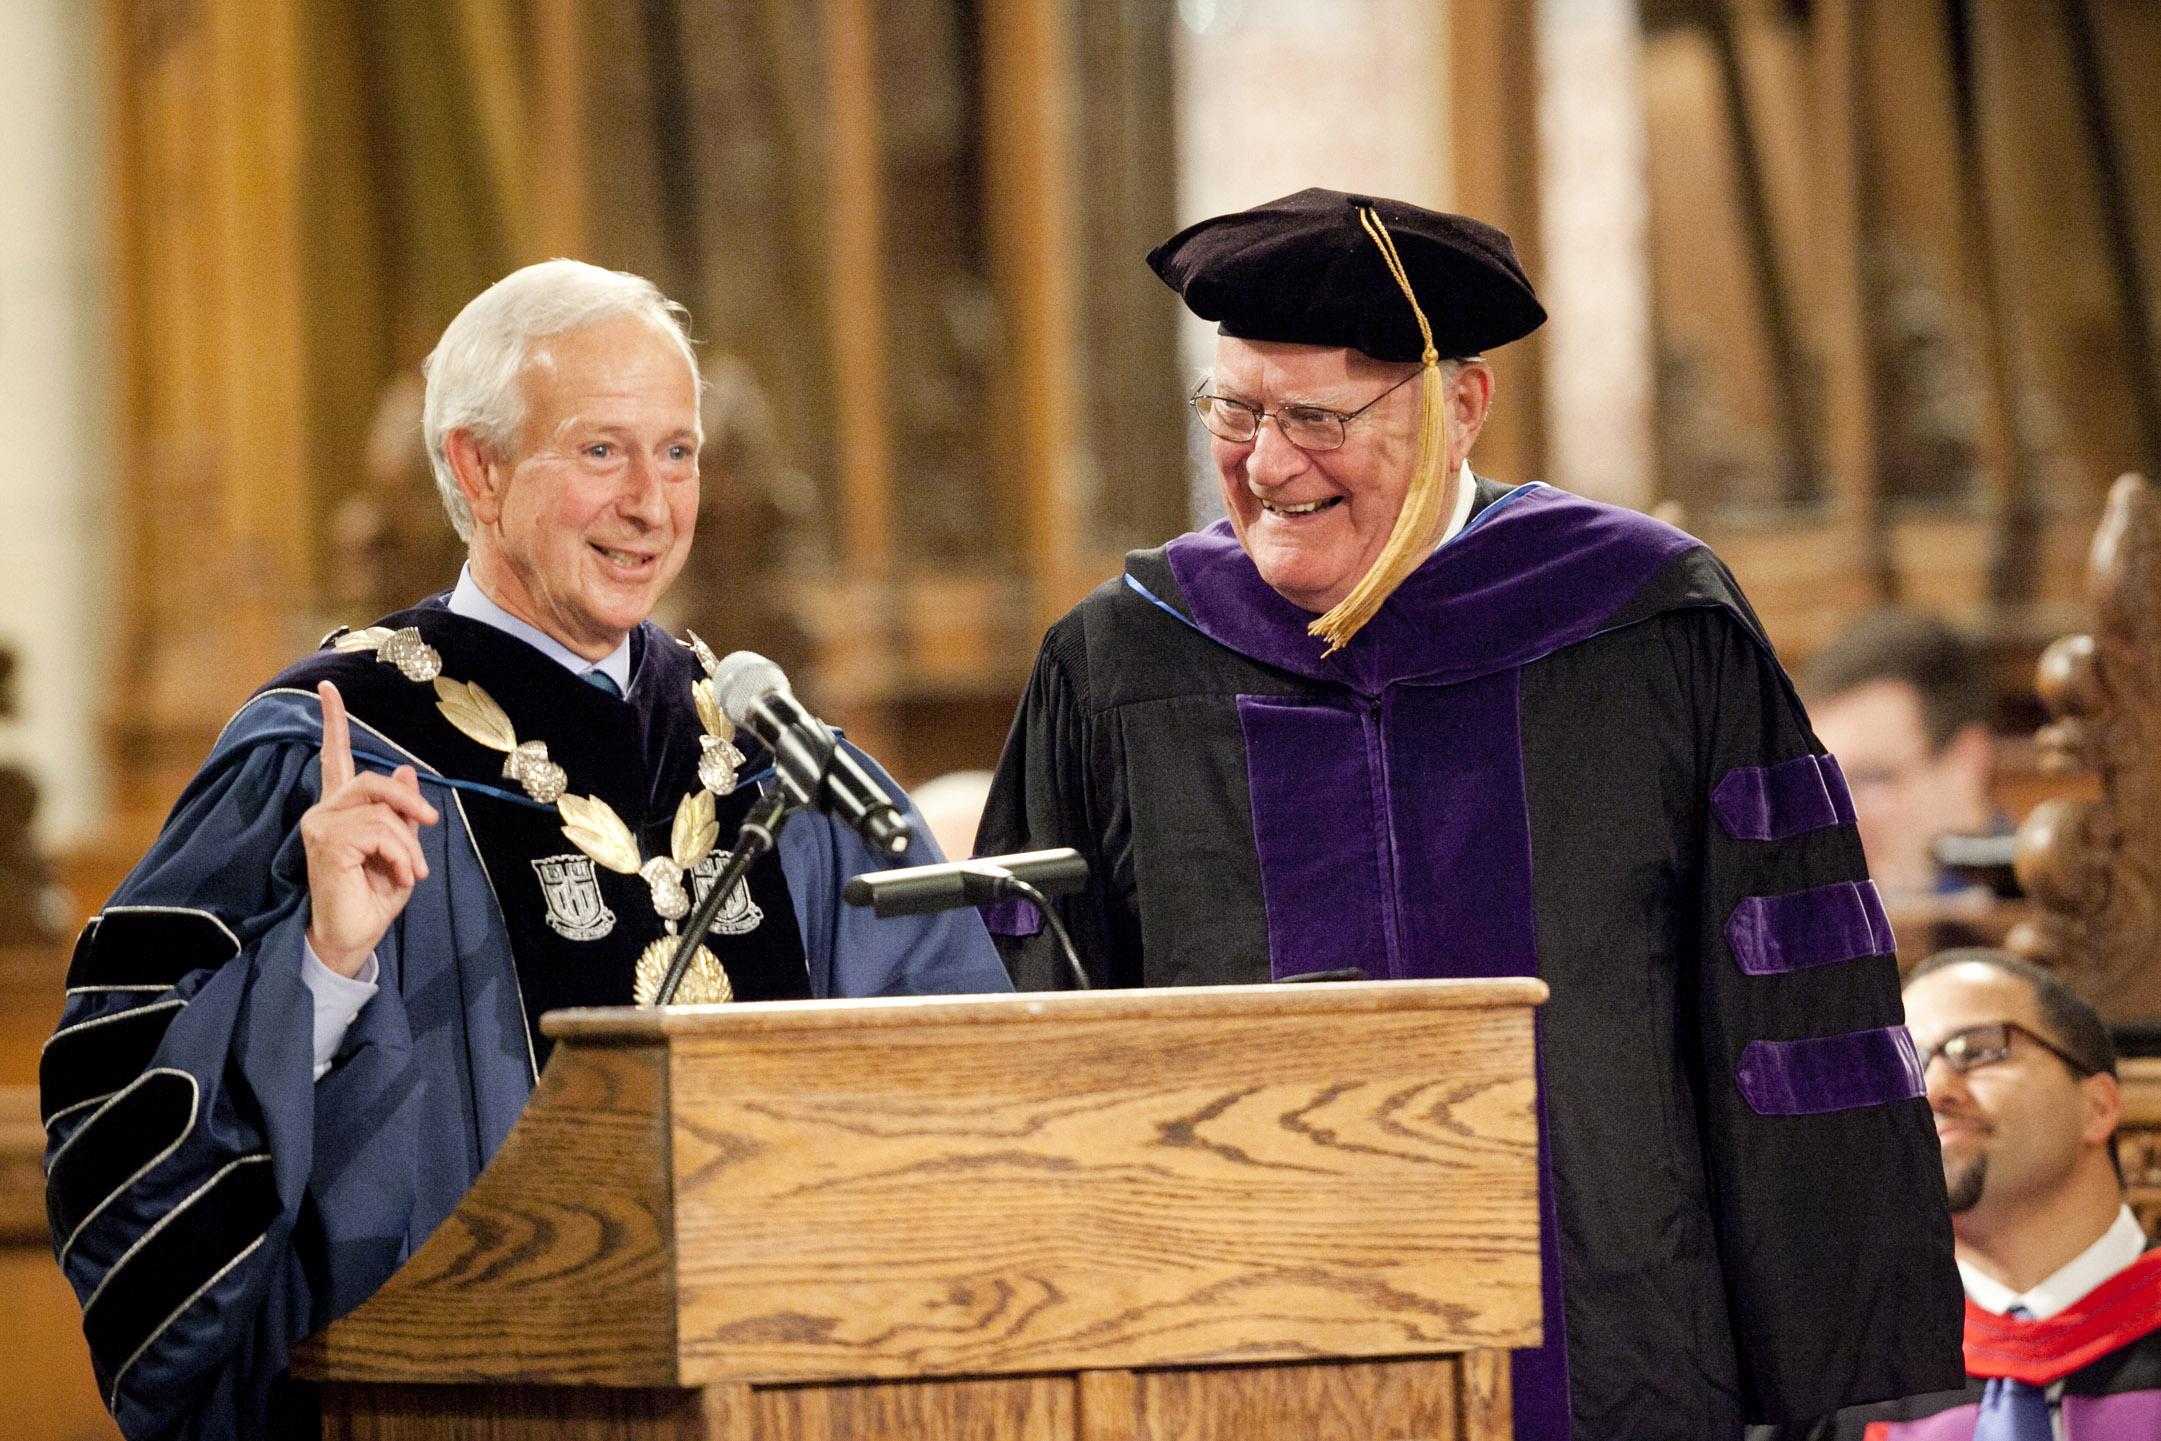 Judge Tjoflat at Founders day ceremony in 2014